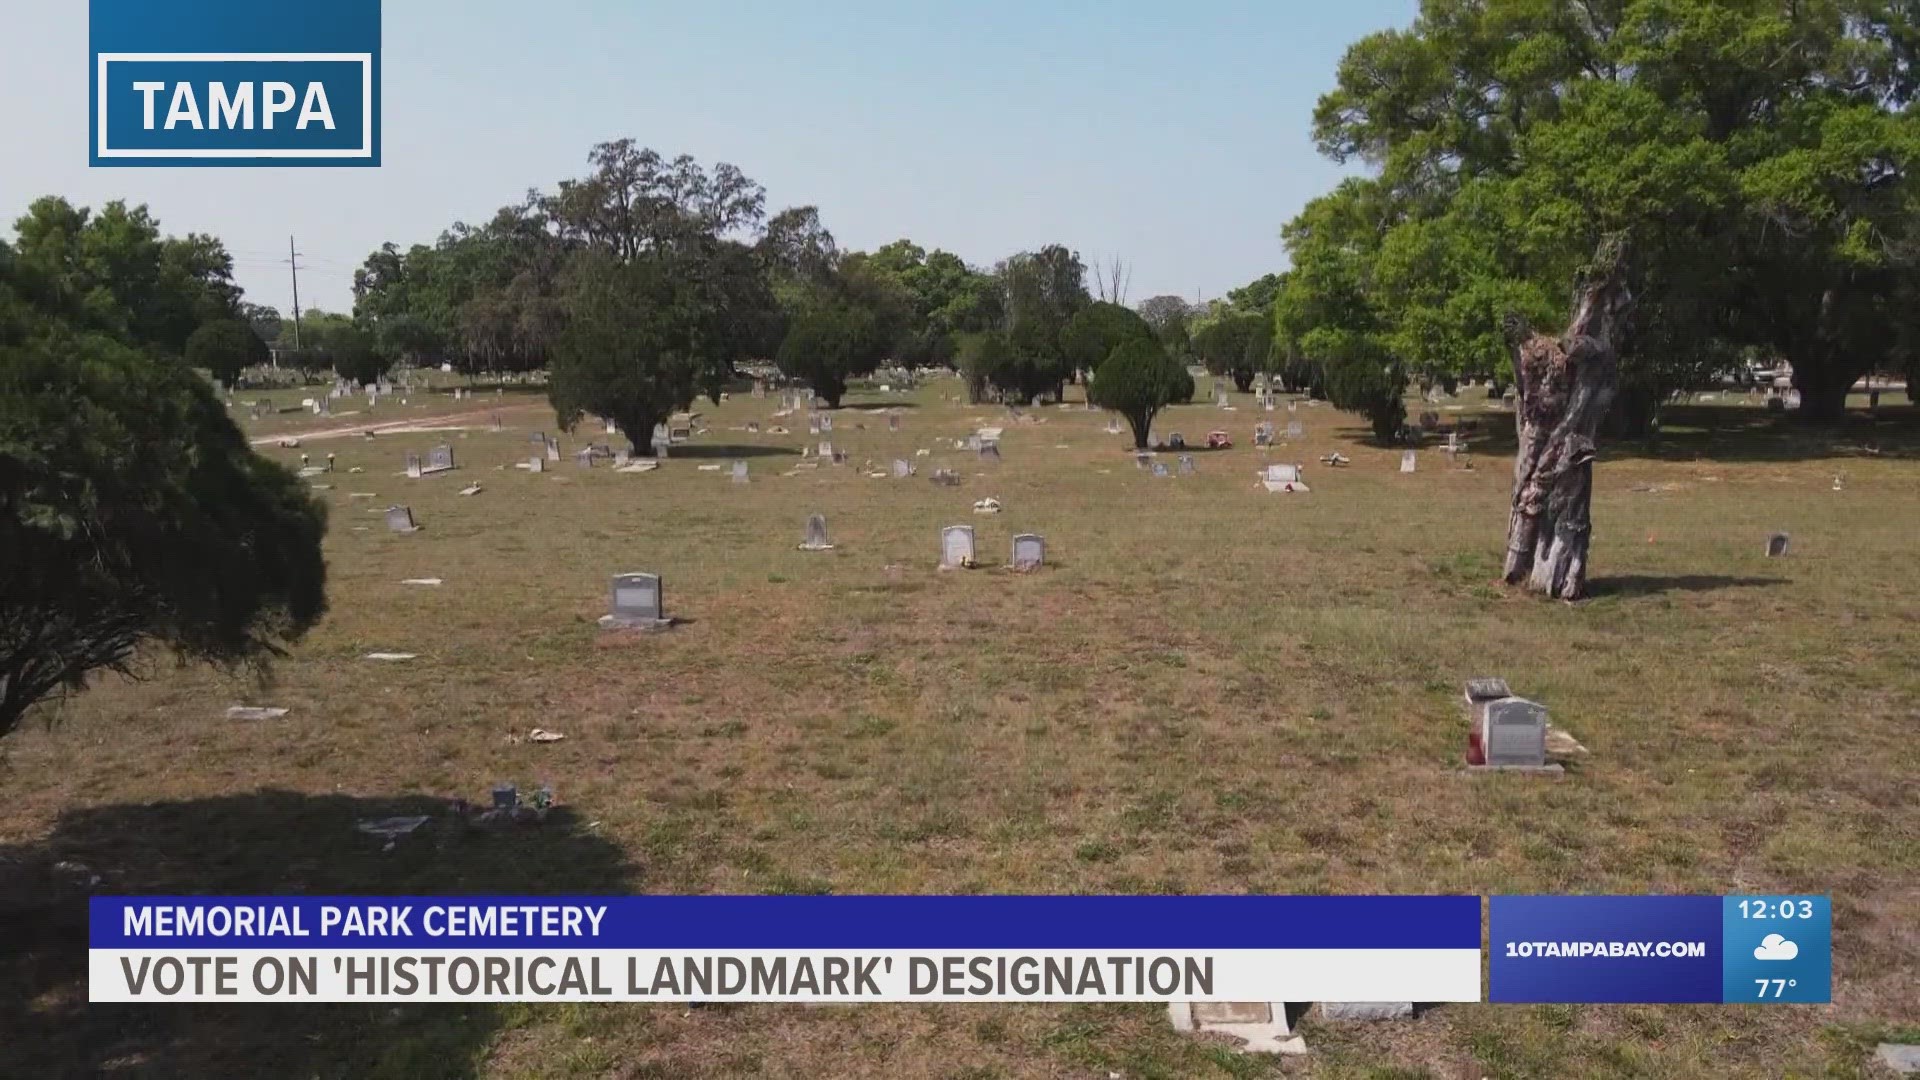 Last year, the city spent $100k to buy the cemetery from a property developer who out-bid the city at auction.